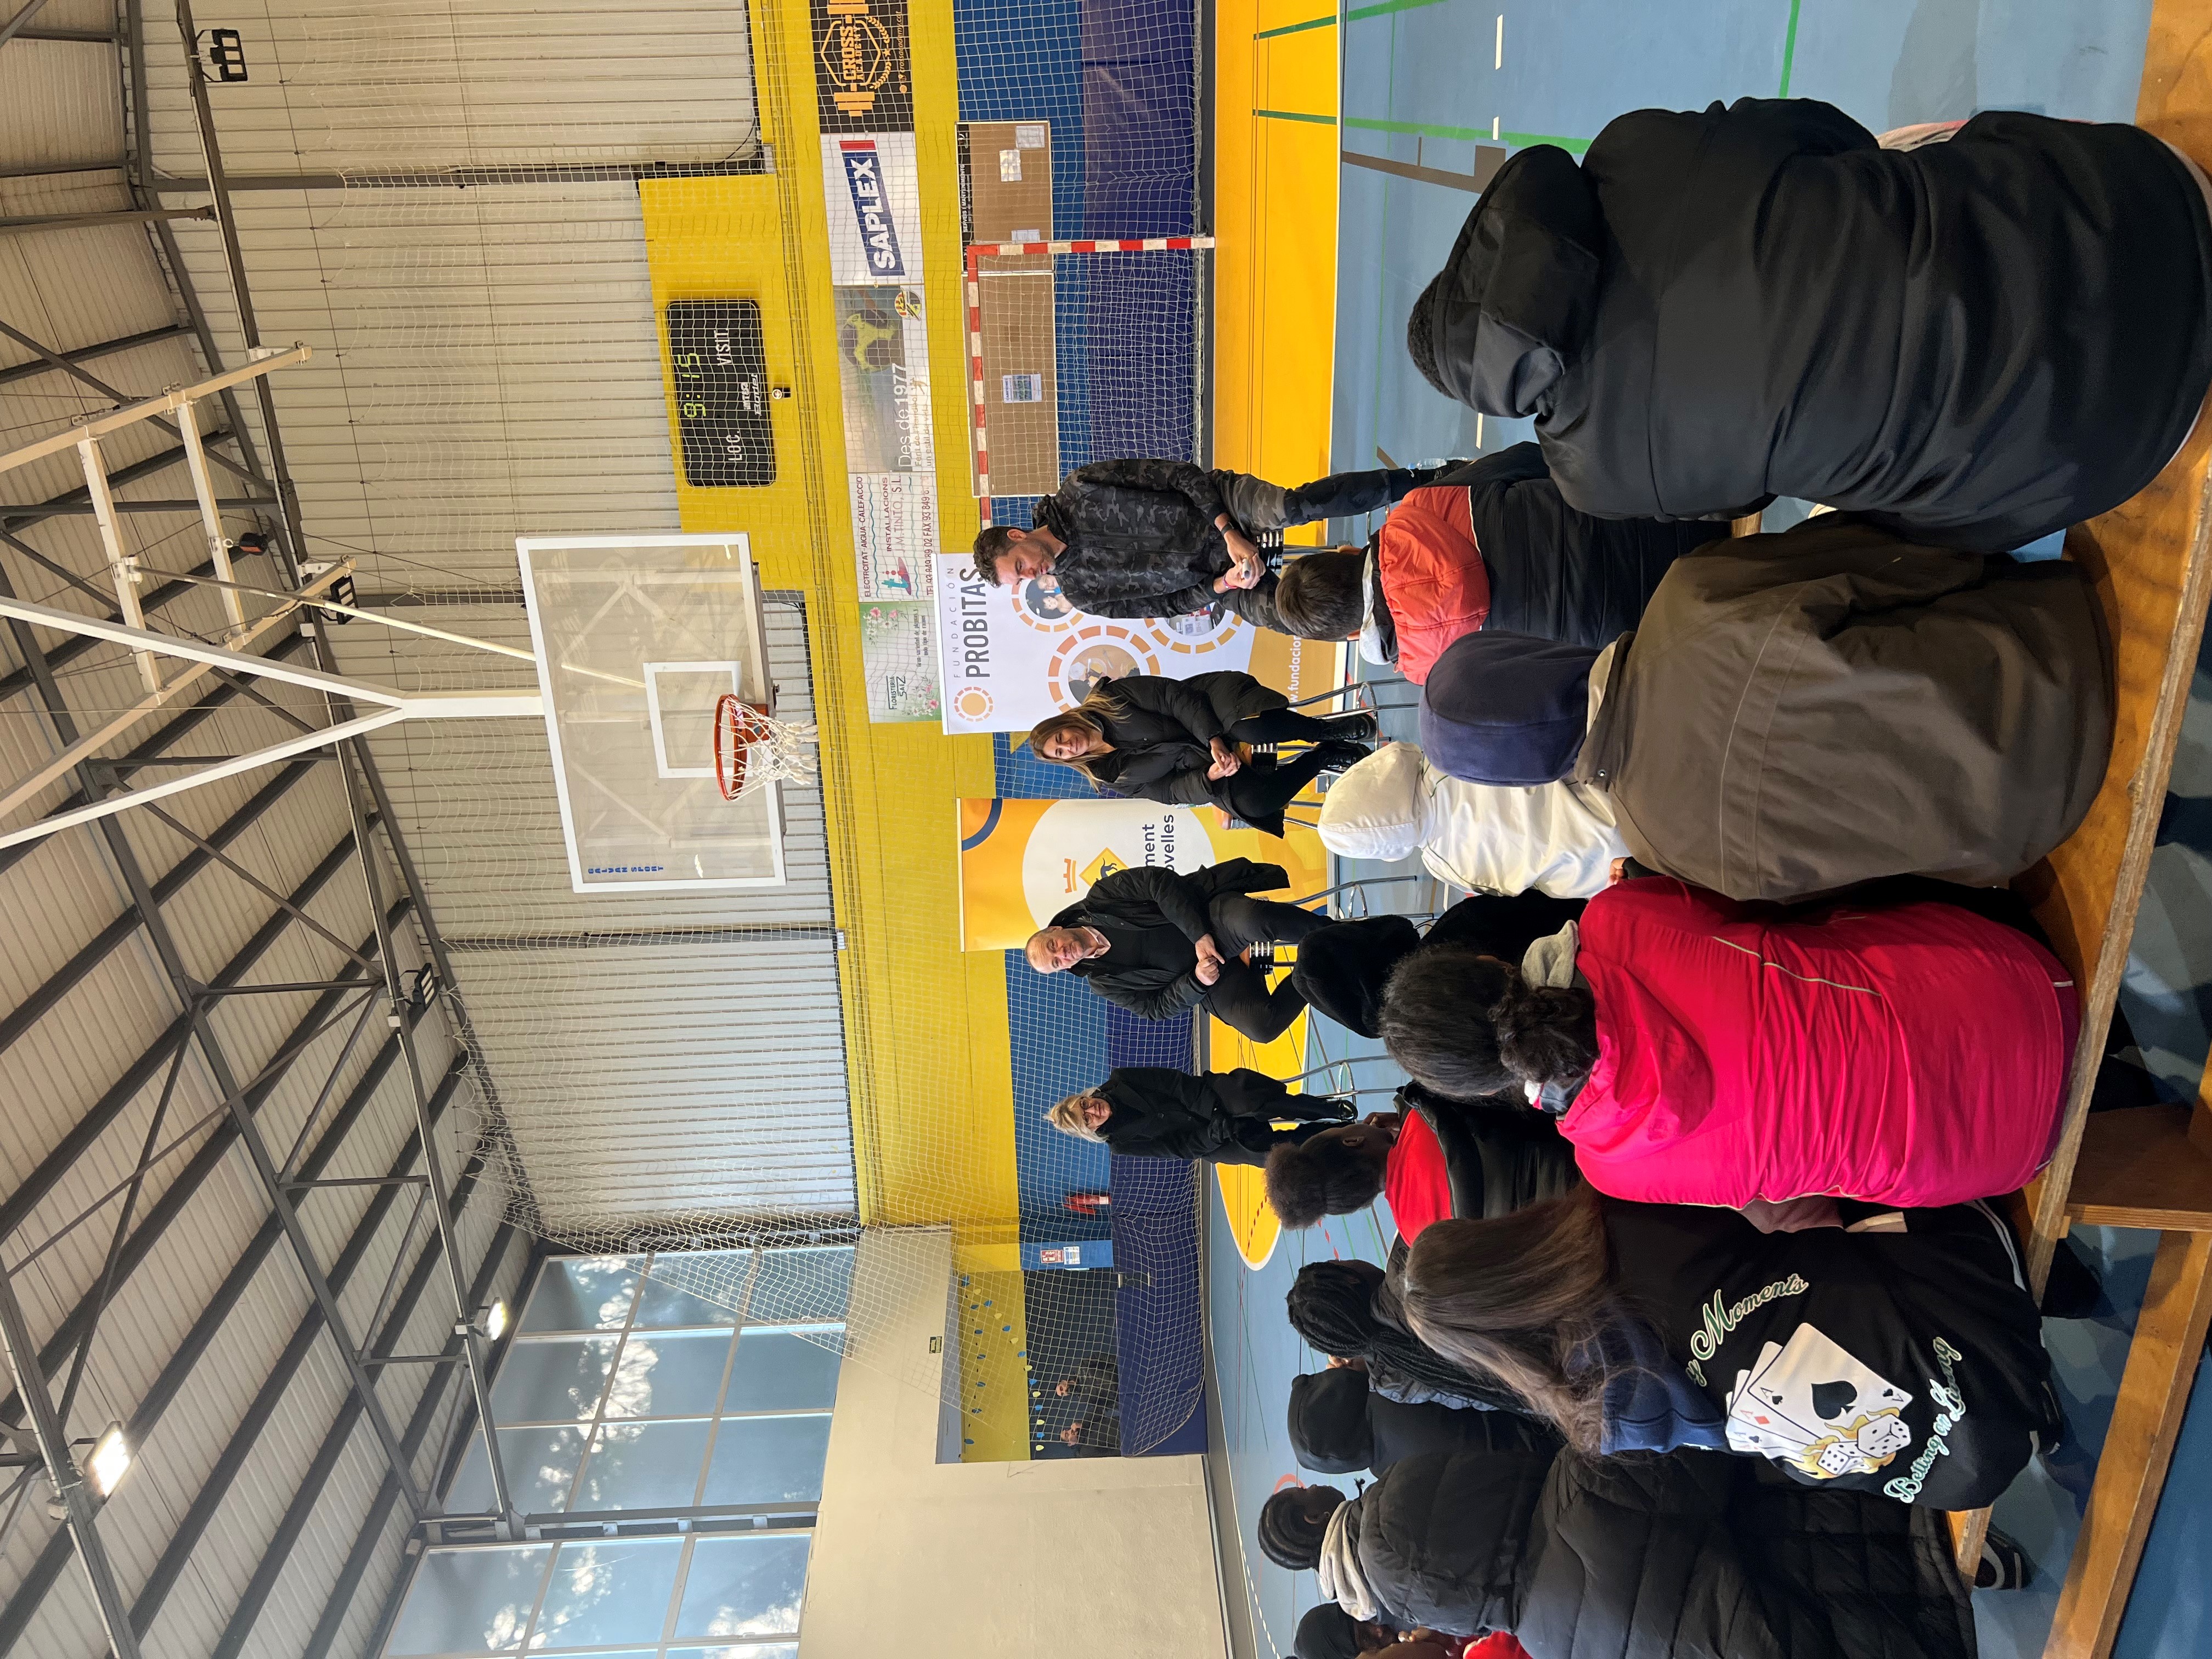 Pau Gasol, an example of a healthy lifestyle for the young people of Canovelles who participate in the Dinem Junts program